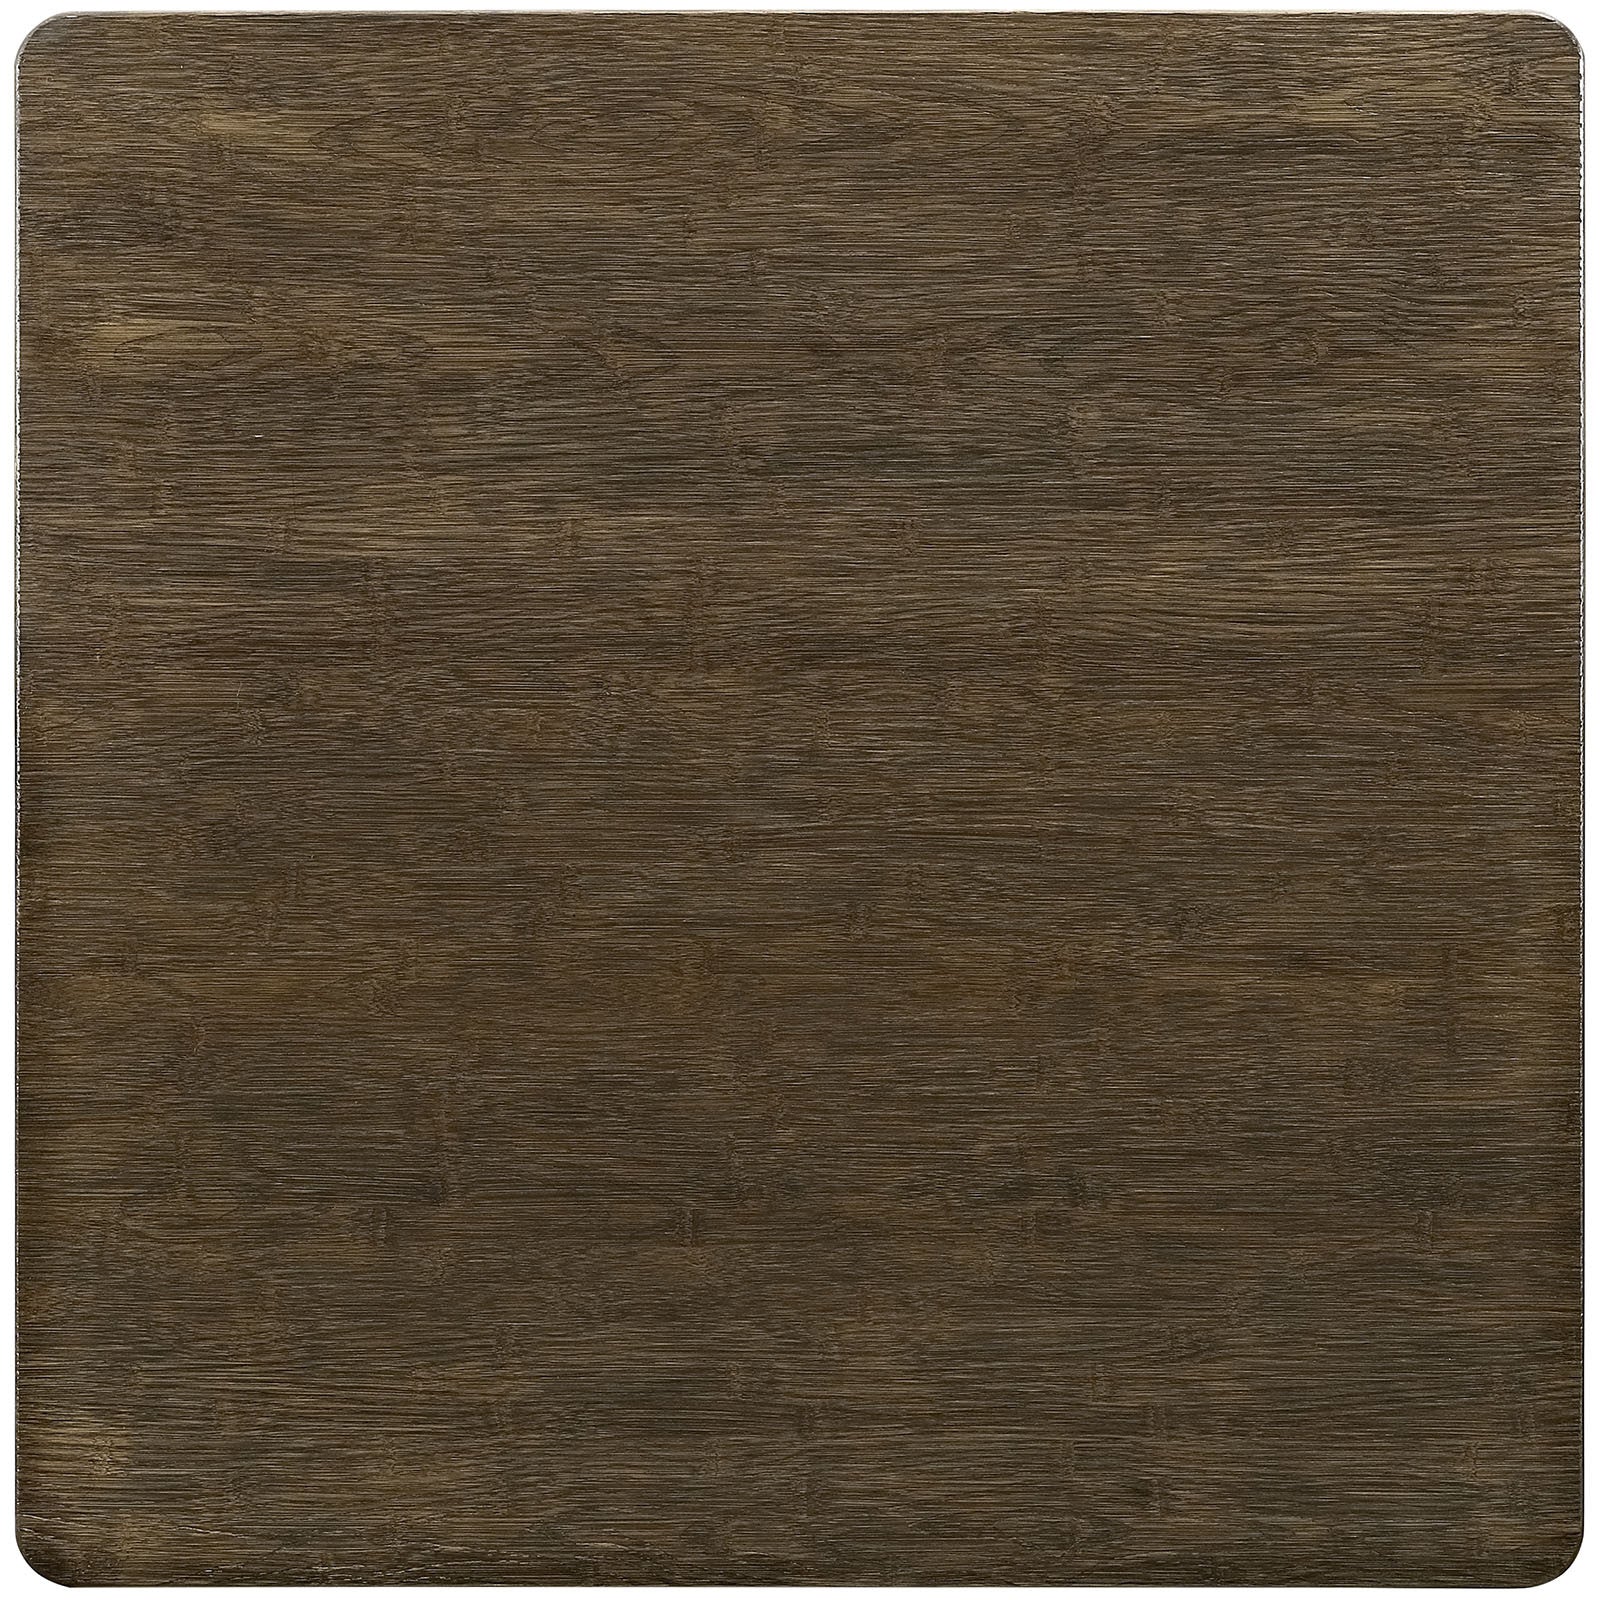 Anthropology Square Wood Dining Table Brown